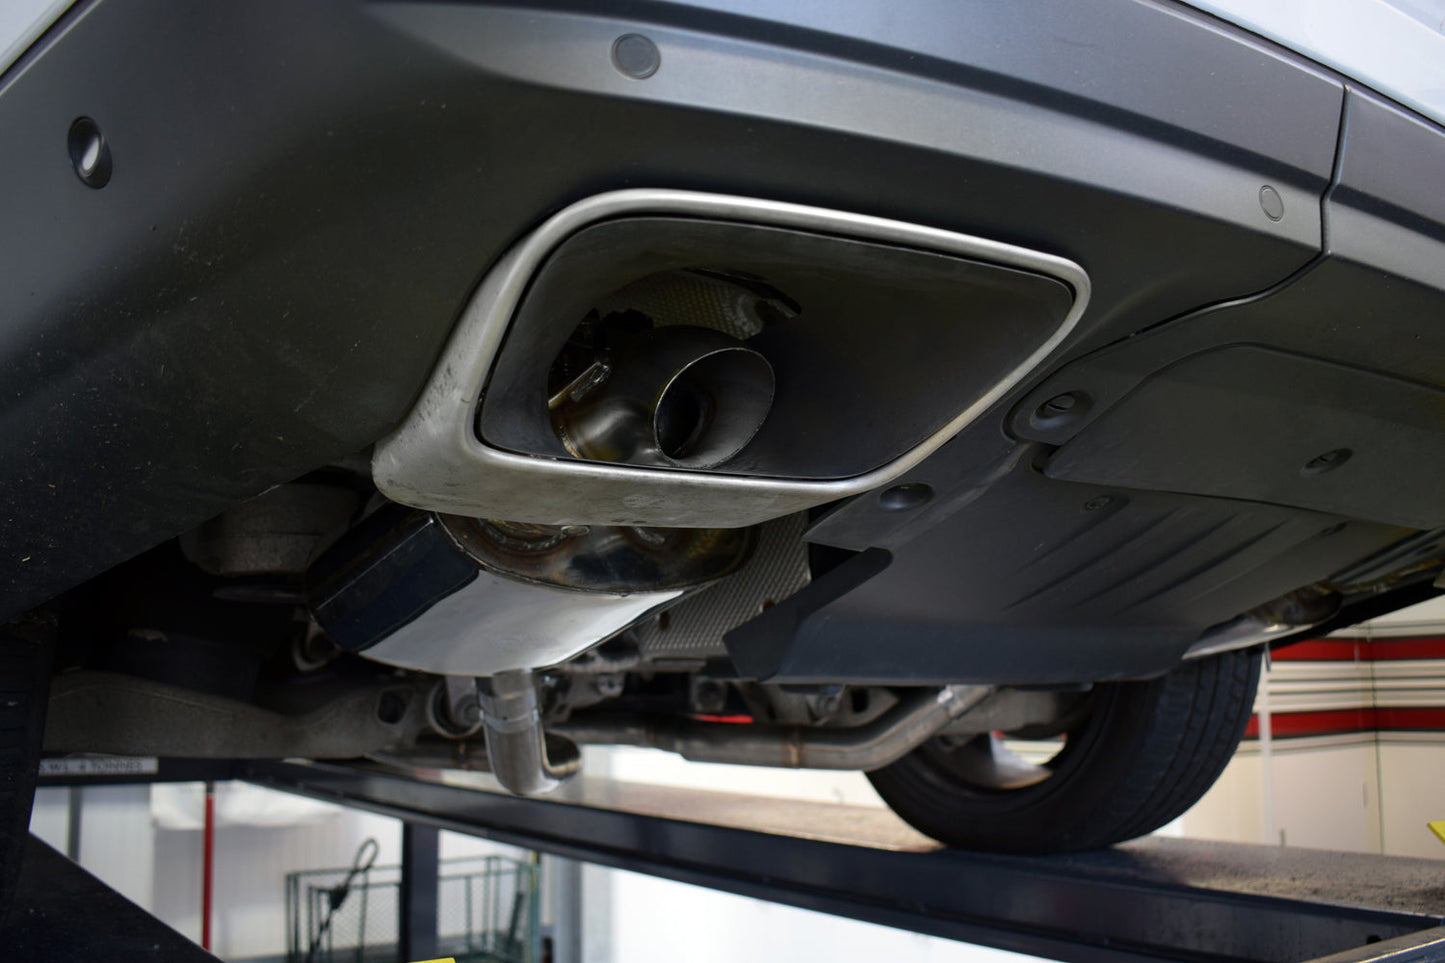 Range Rover 5 Litre V8 Super Charged Sport Exhaust with Sound Architect™ (2013-2018 & 2019-2022 on) - QuickSilver Exhausts